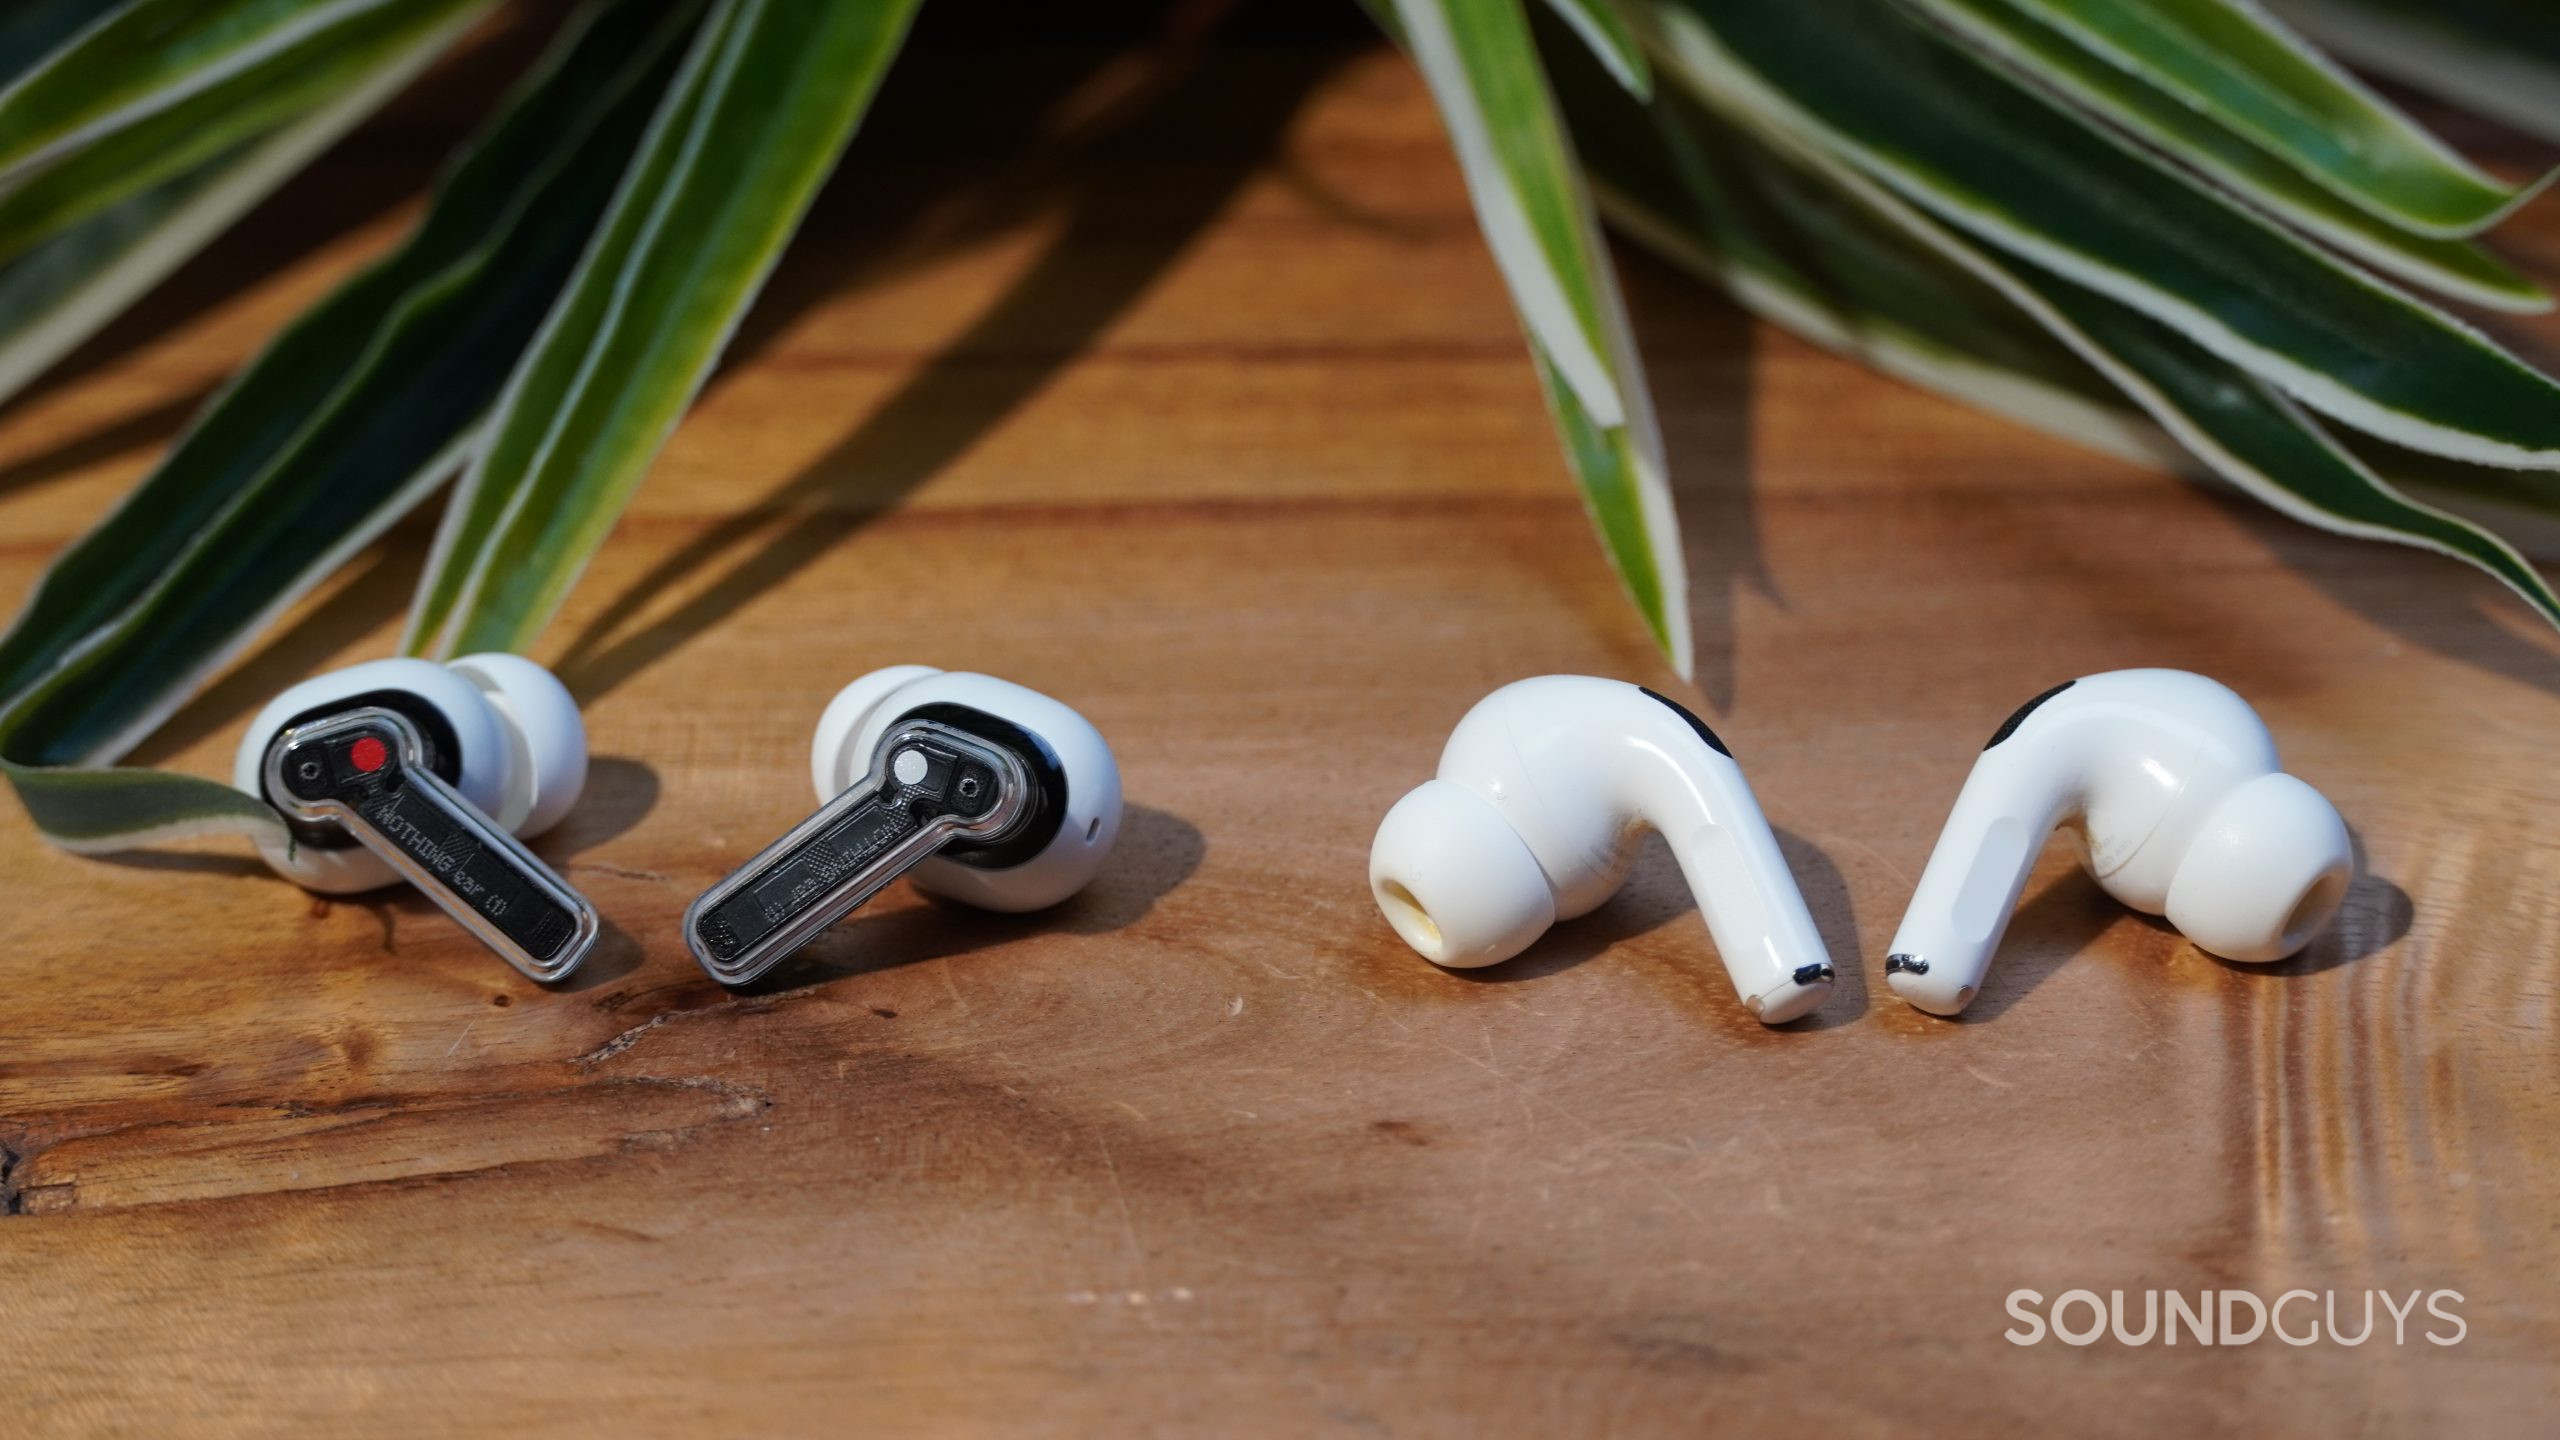 Nothing Ear 1 and Apple AirPods Pro earbuds on table in front of a plant